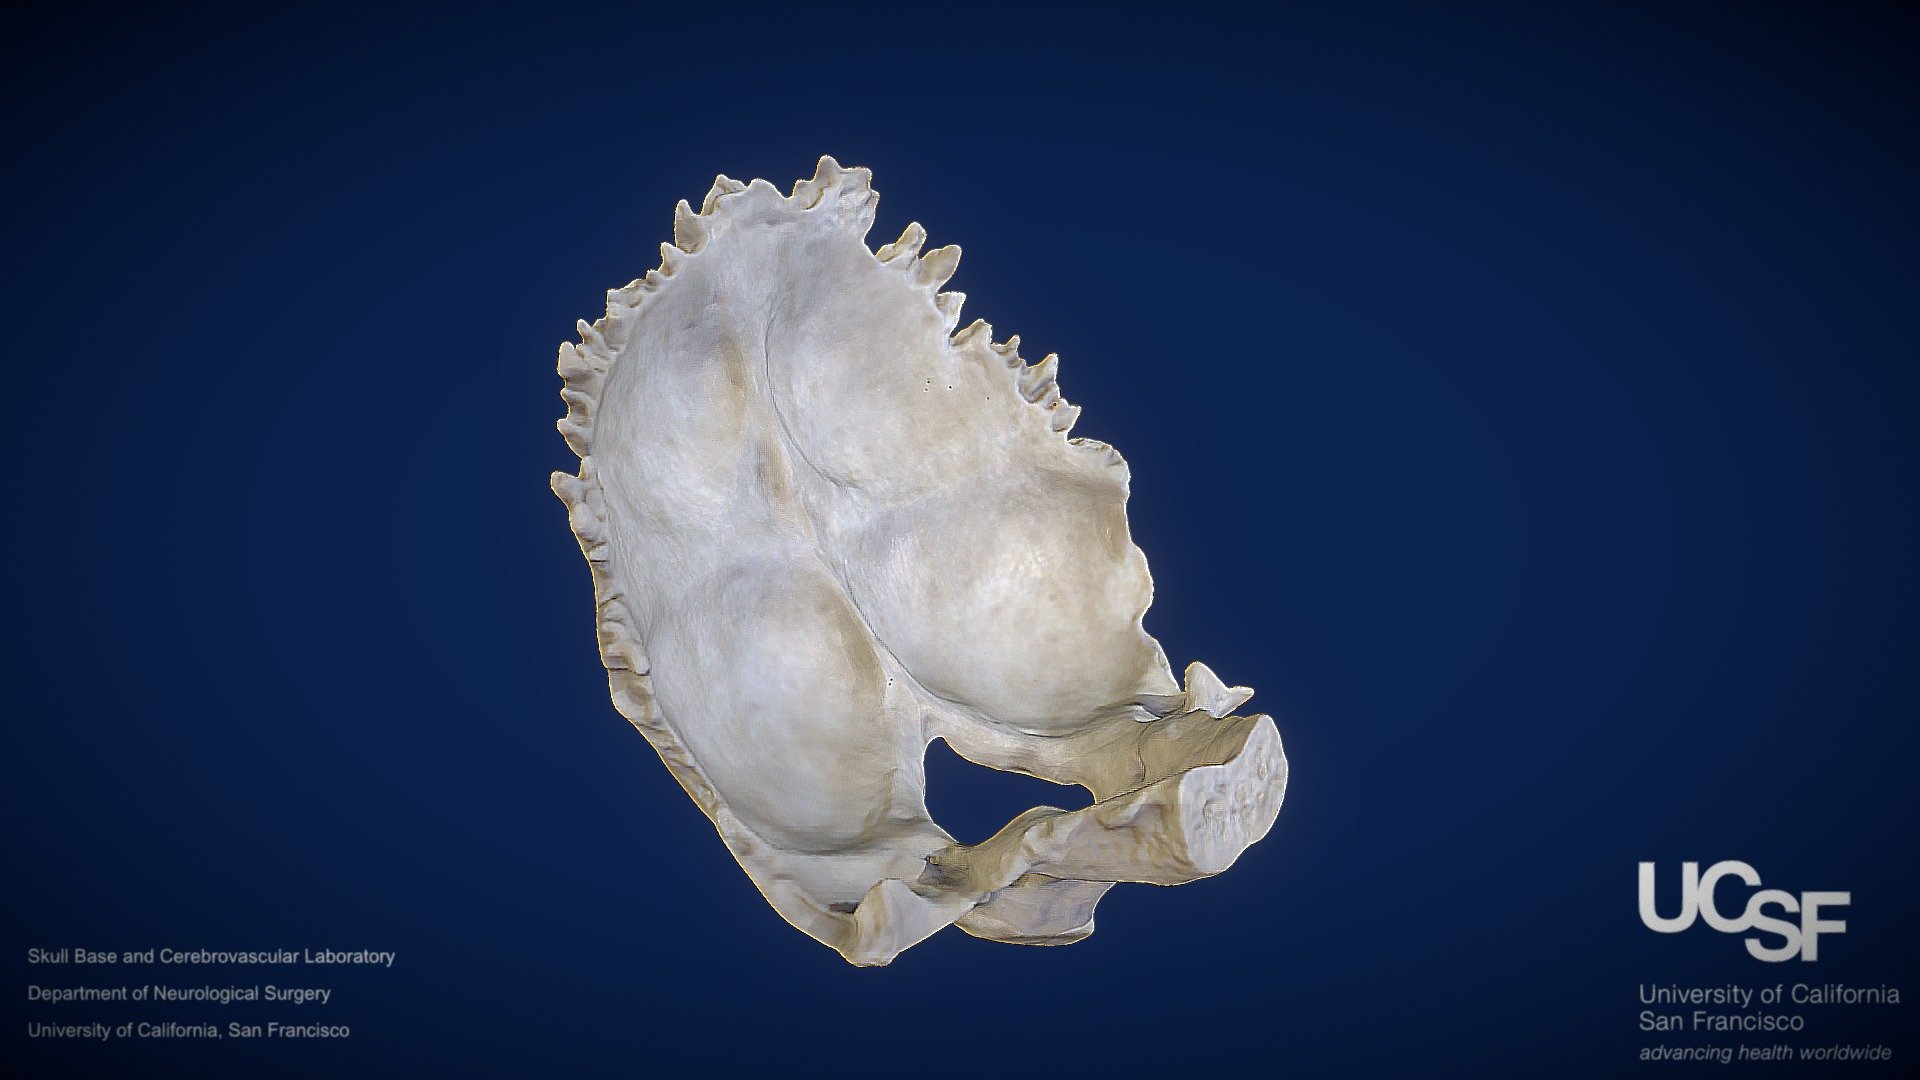 Volumetric model of occipital bone, with annotations of the main structures.

We would like to acknowledge Eric Bauer for facilitating the base mesh used to described the anatomical concepts in this model.
Original Mesh:https://sketchfab.com/3d-models/human-occipital-bone-dd3e27f4079f43bab063e3db26c4482c

Immersive Surgical Anatomy of the Craniocervical Junction Article:
https://www.cureus.com/articles/40530-immersive-surgical-anatomy-of-the-craniocervical-junction#article-disclosures-acknowledgements - Model 1: Occipital Bone - 3D model by SBCVL_UCSF 3d model